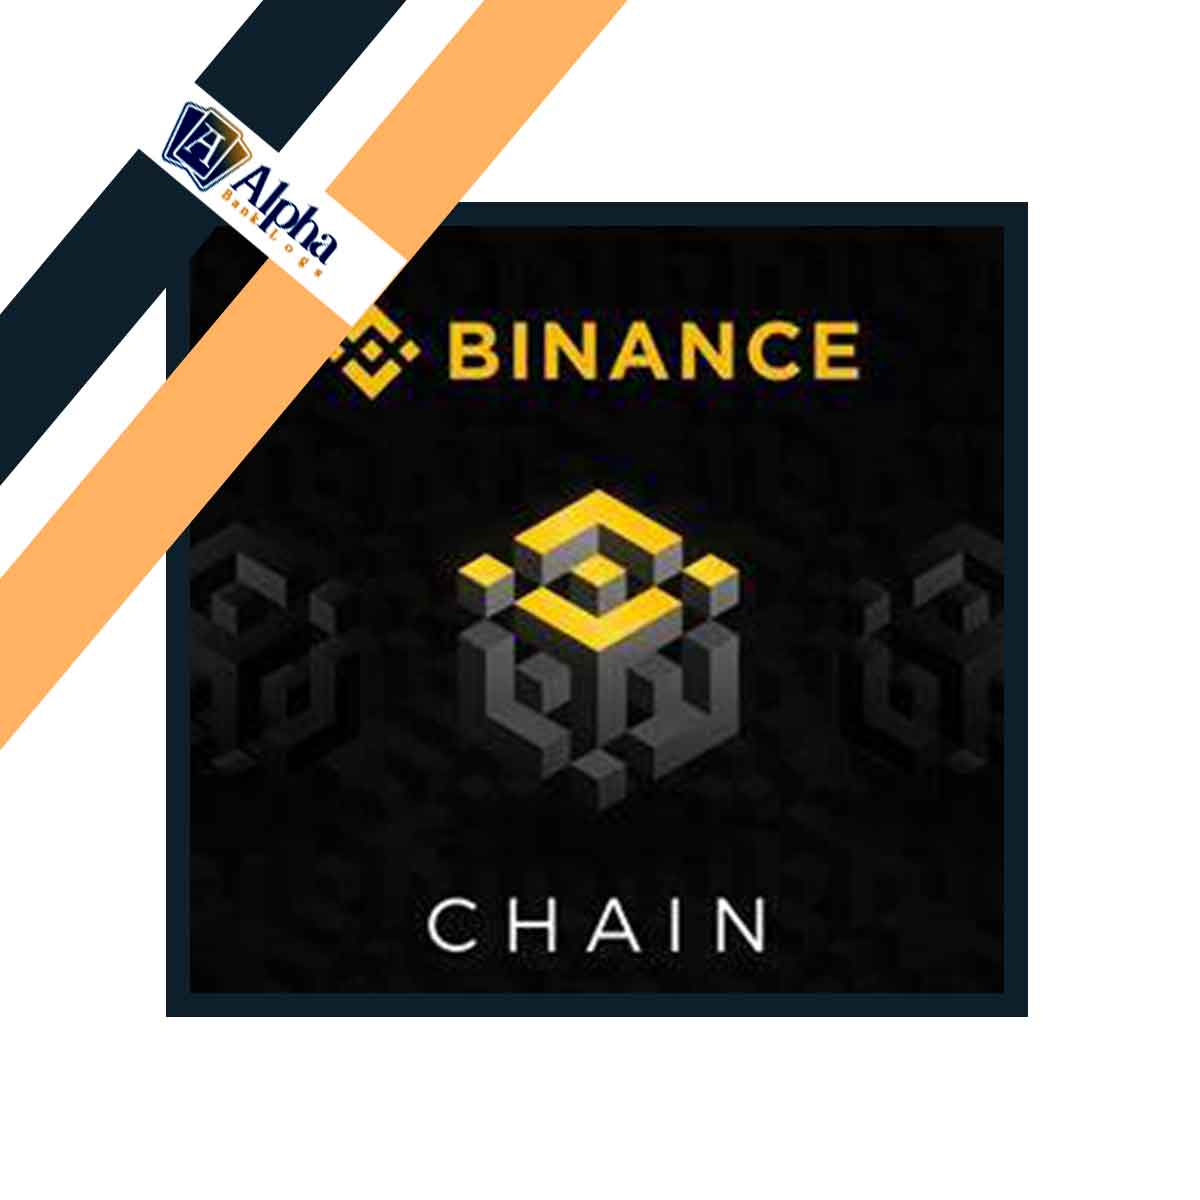 USA Binance Account + Email Access + Number Access + Fullz